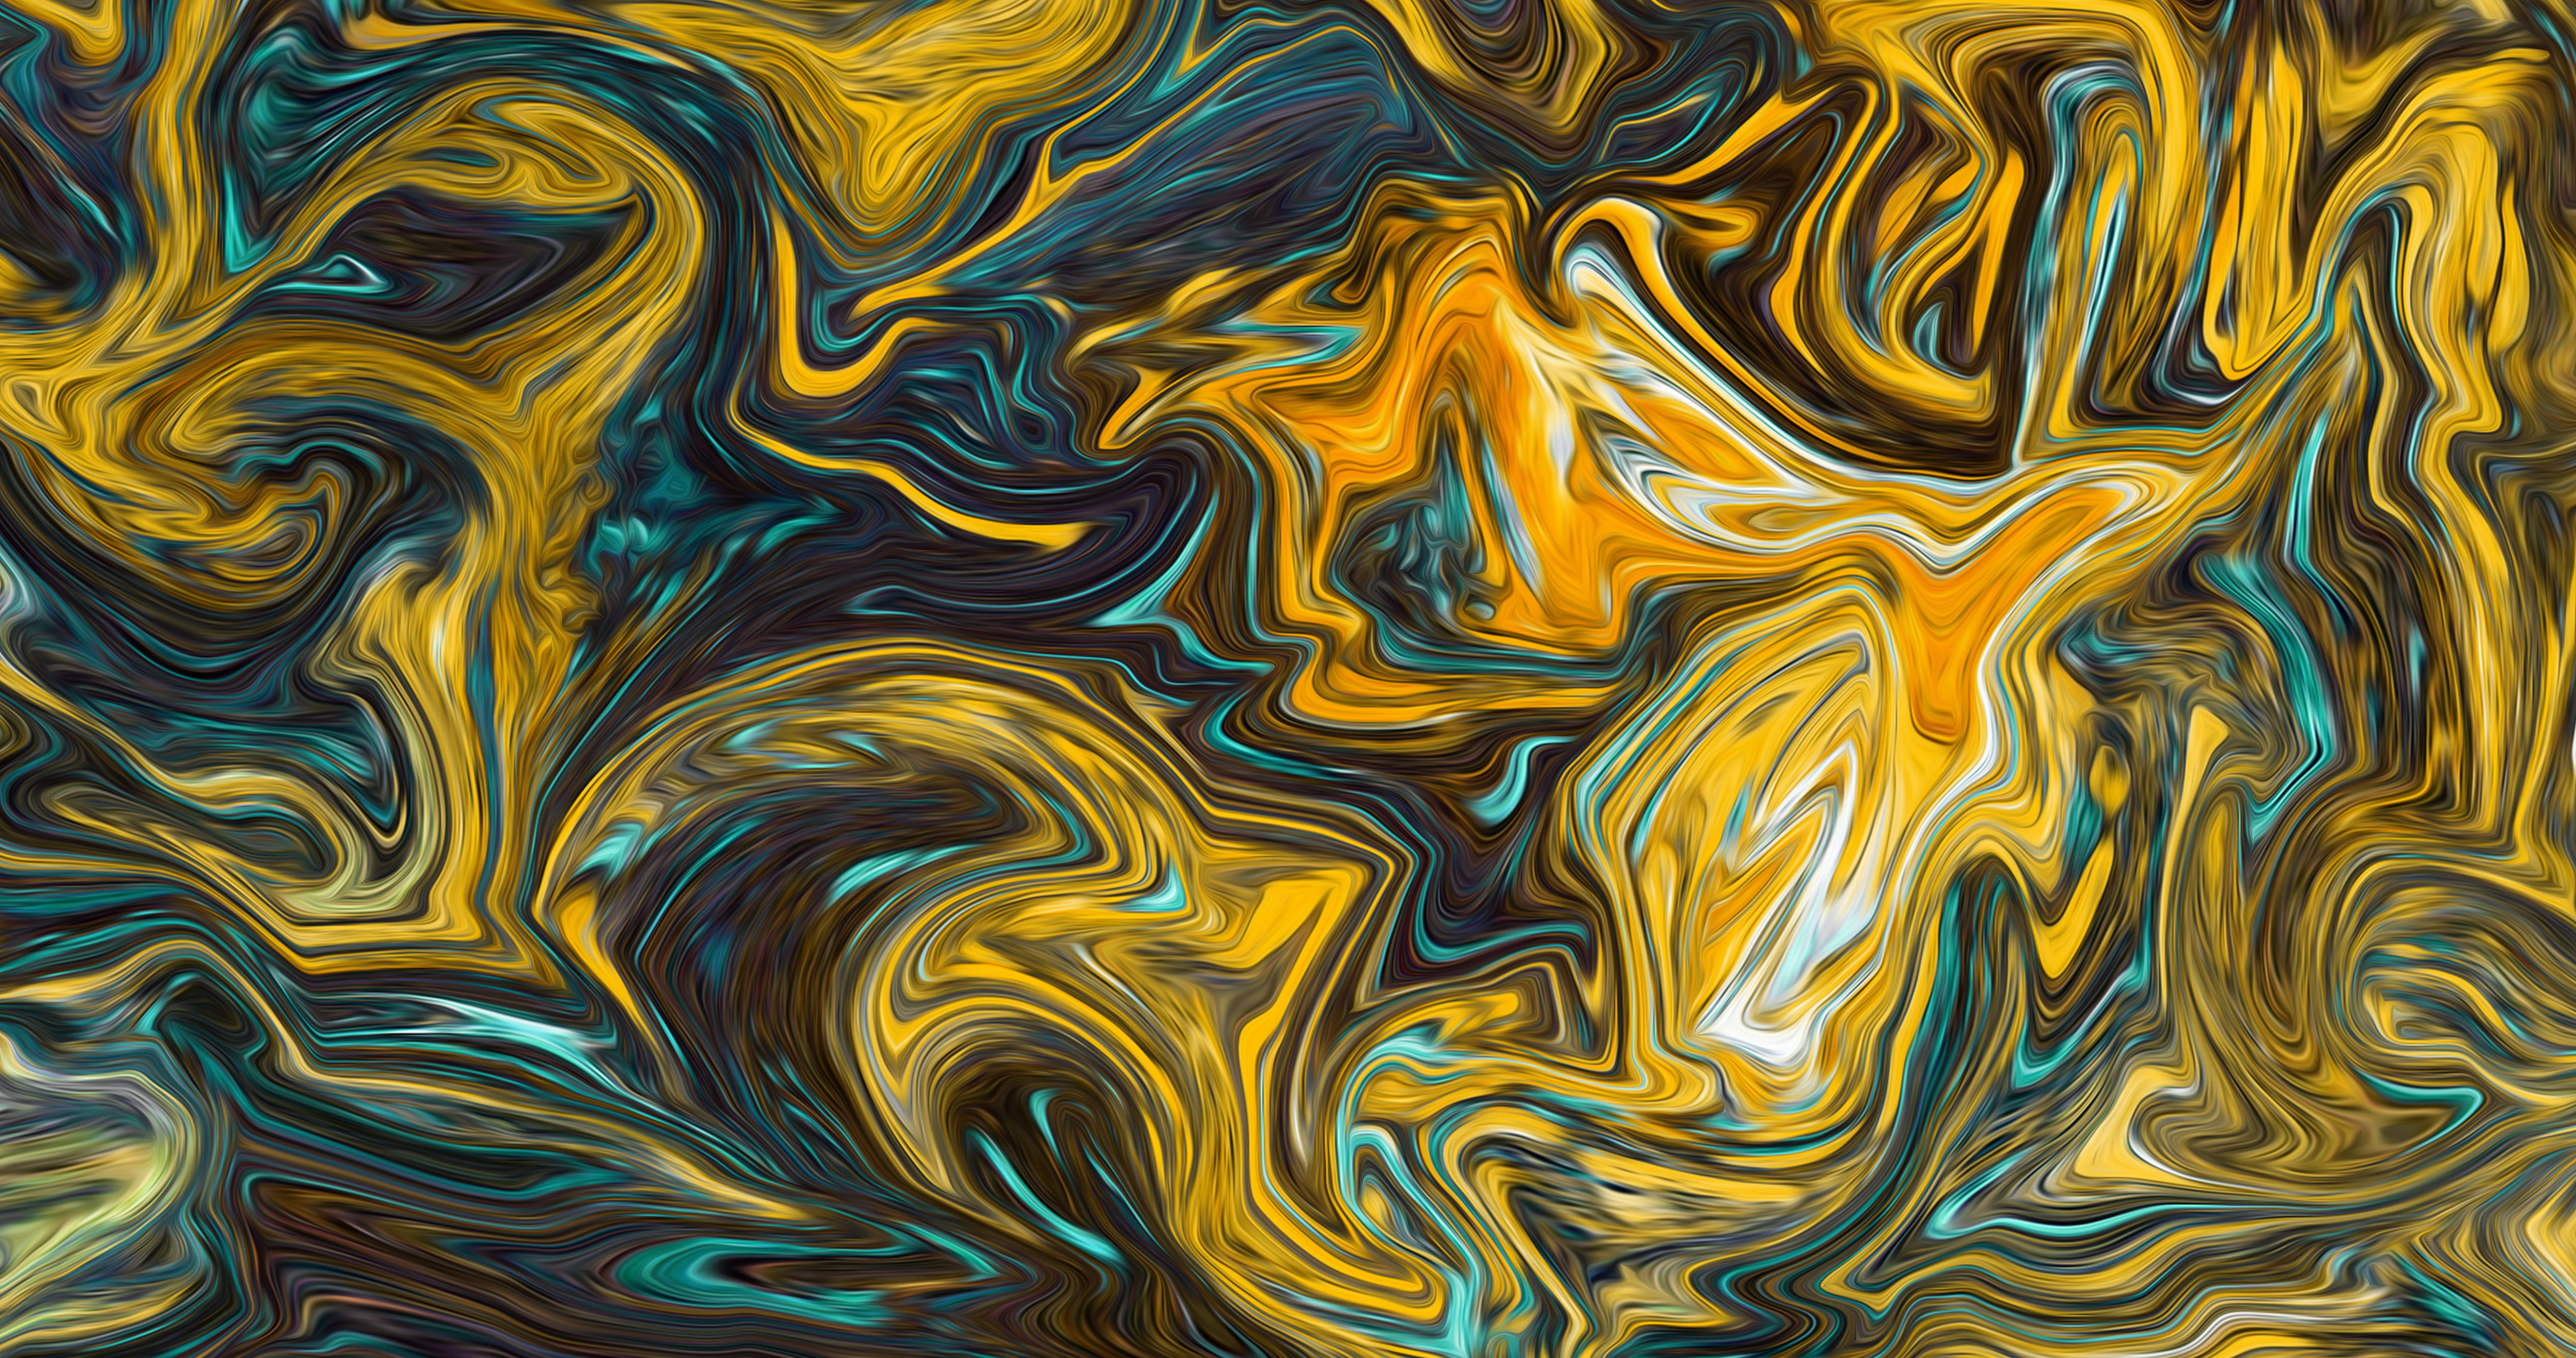 Abstract Fluid Liquid Colorful Artwork ArtStation Brush Paint Brushes Yellow Shapes XEBELiON 4096x2160